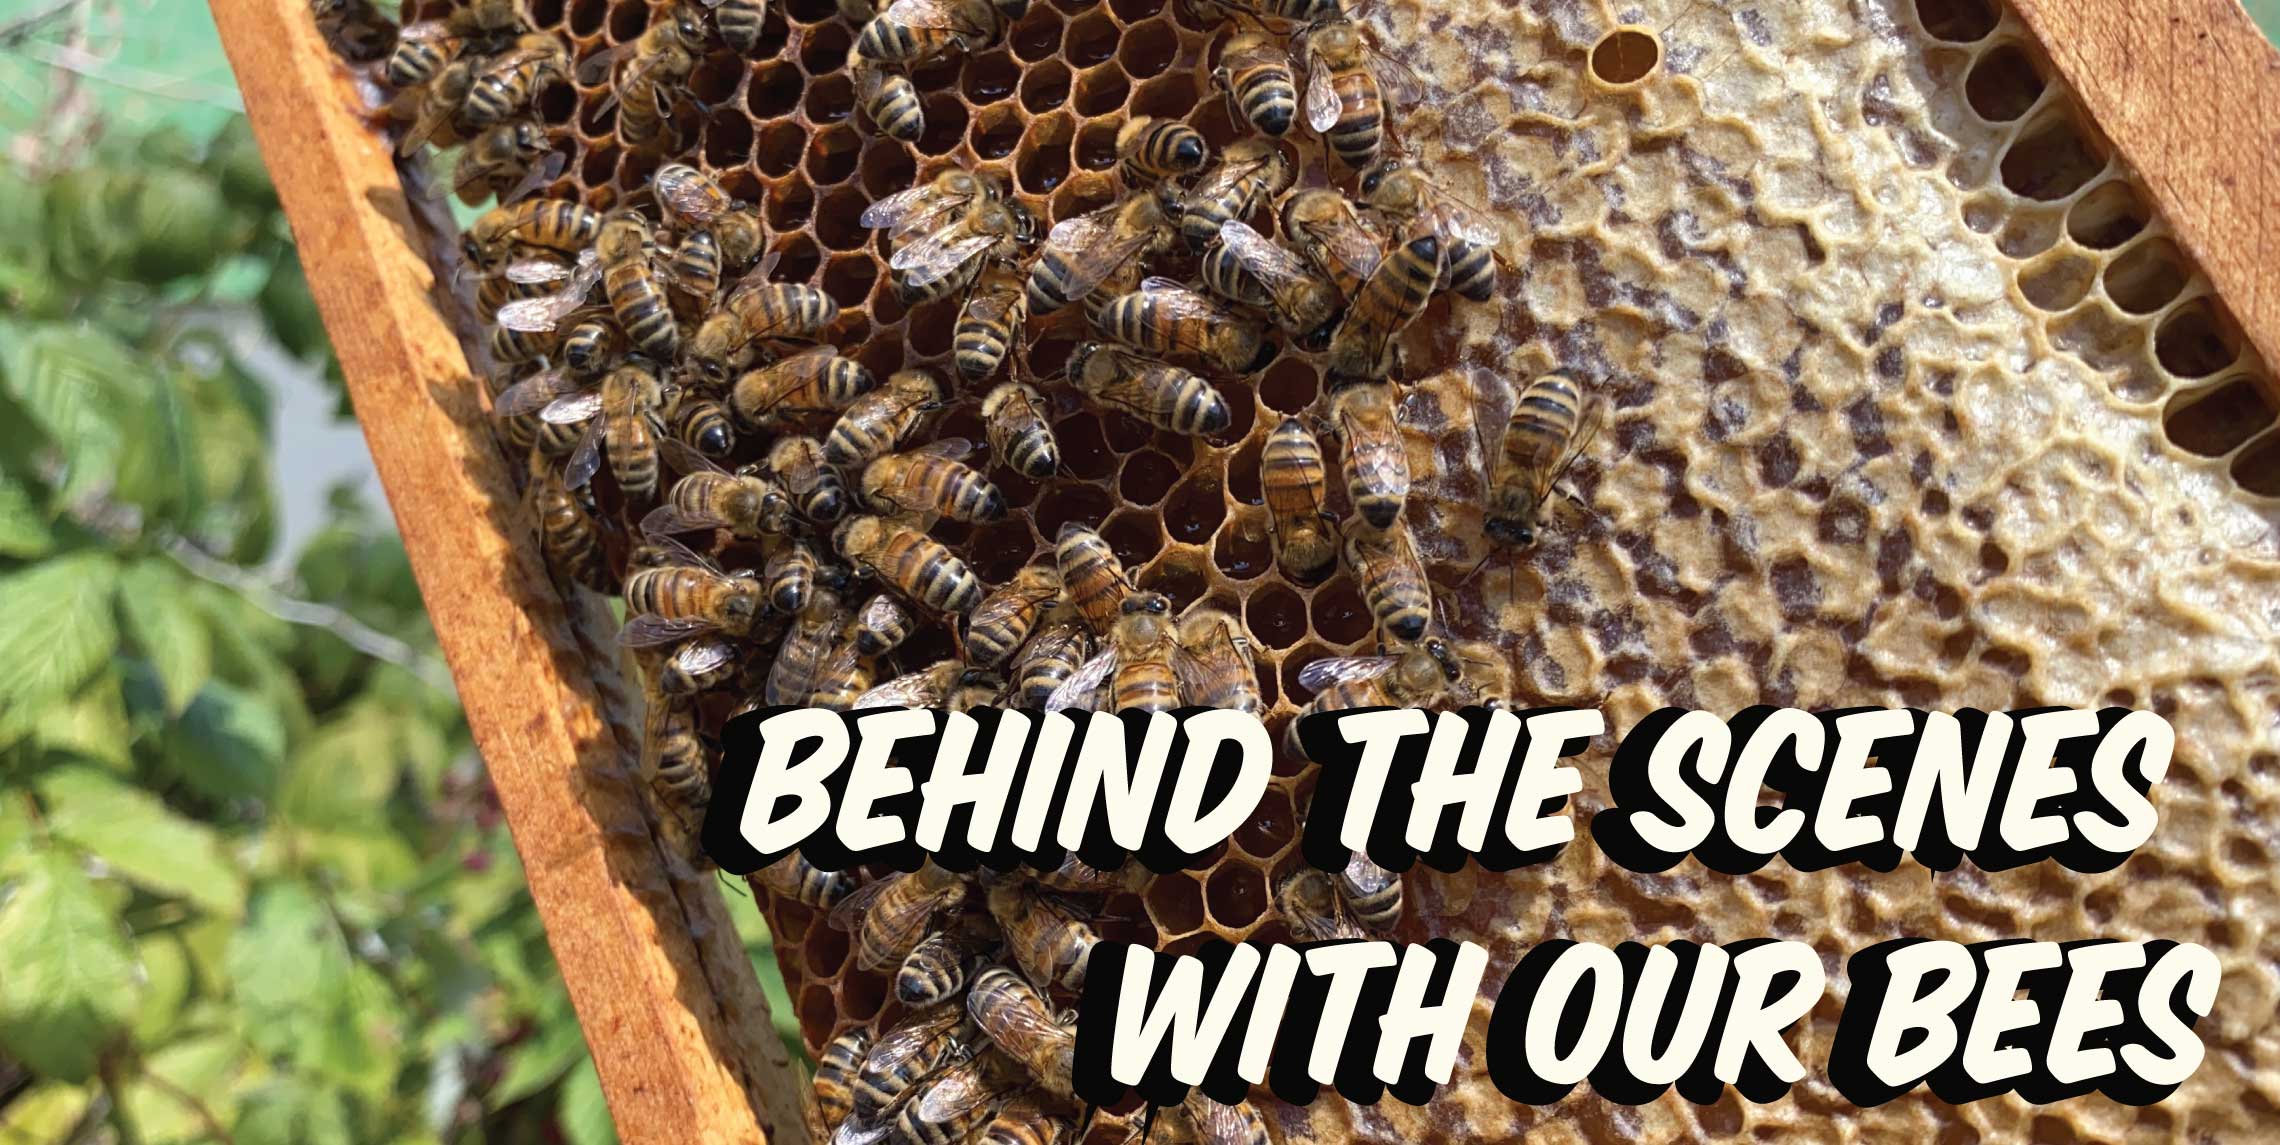 Behind the scenes with the bees